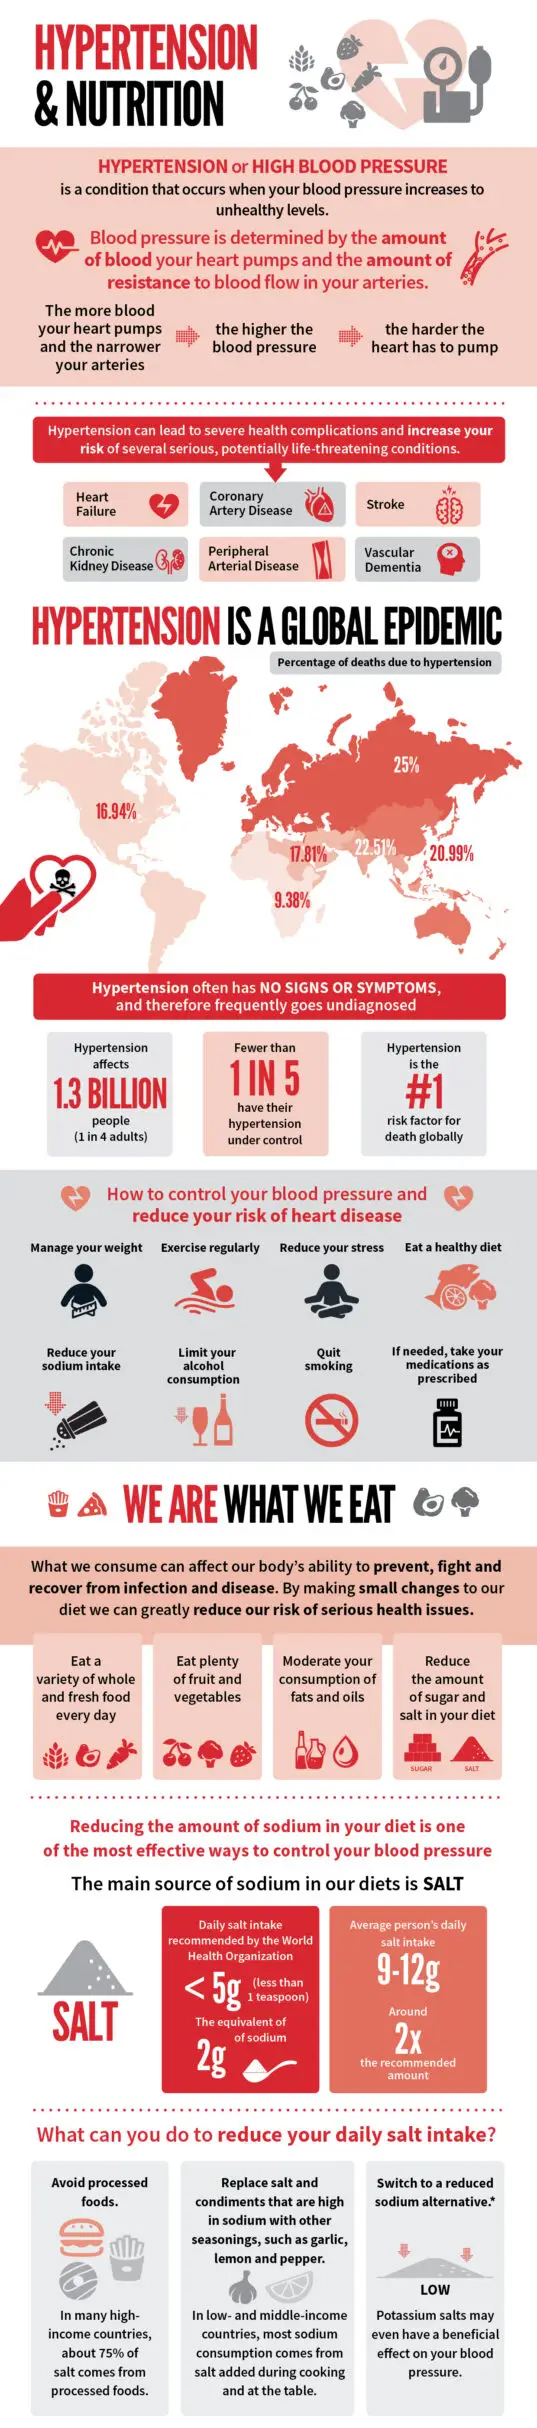 National High Blood Pressure Education Month Infographic: HYPERTENSION & NUTRITION